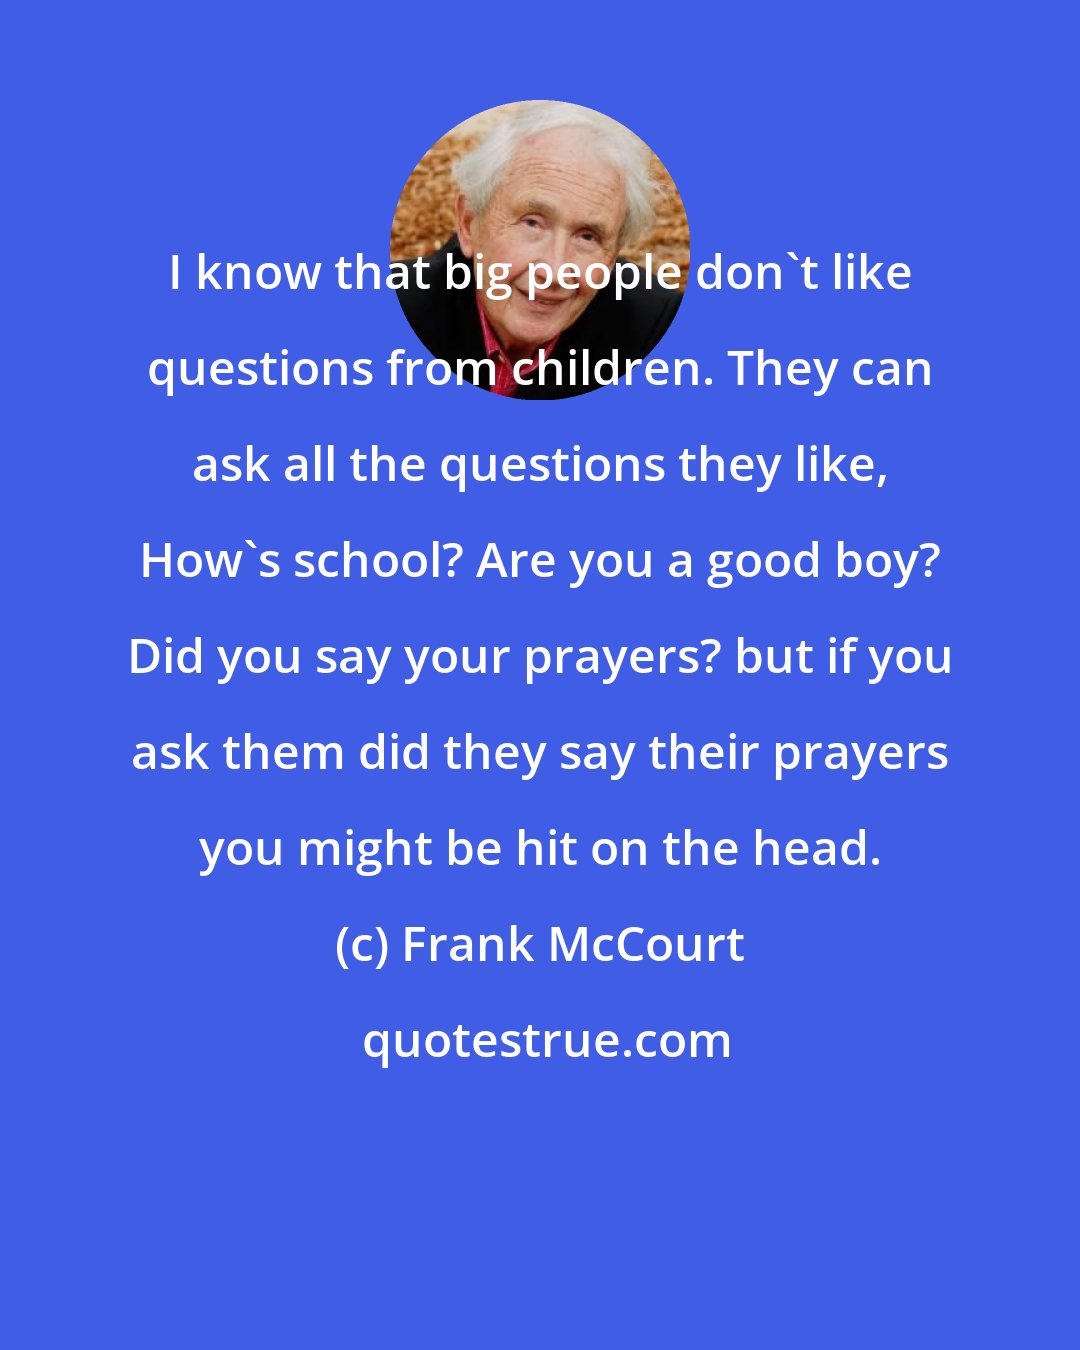 Frank McCourt: I know that big people don't like questions from children. They can ask all the questions they like, How's school? Are you a good boy? Did you say your prayers? but if you ask them did they say their prayers you might be hit on the head.